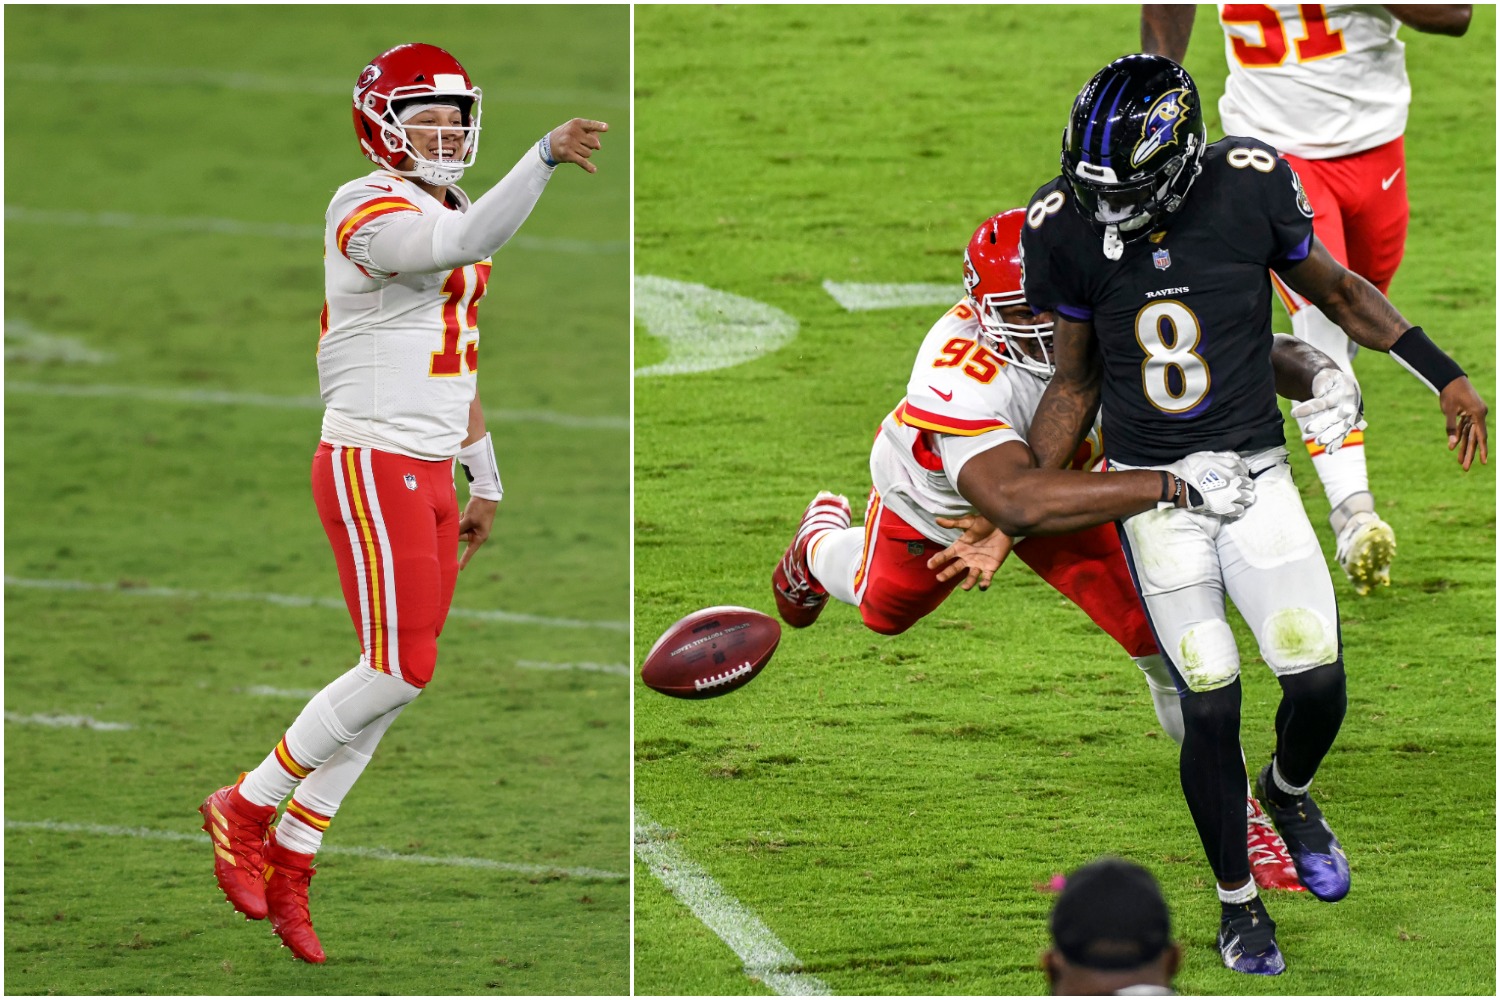 Patrick Mahomes just proved why Lamar Jackson isn't in his class as a quarterback with a monster performance on Monday Night Football.